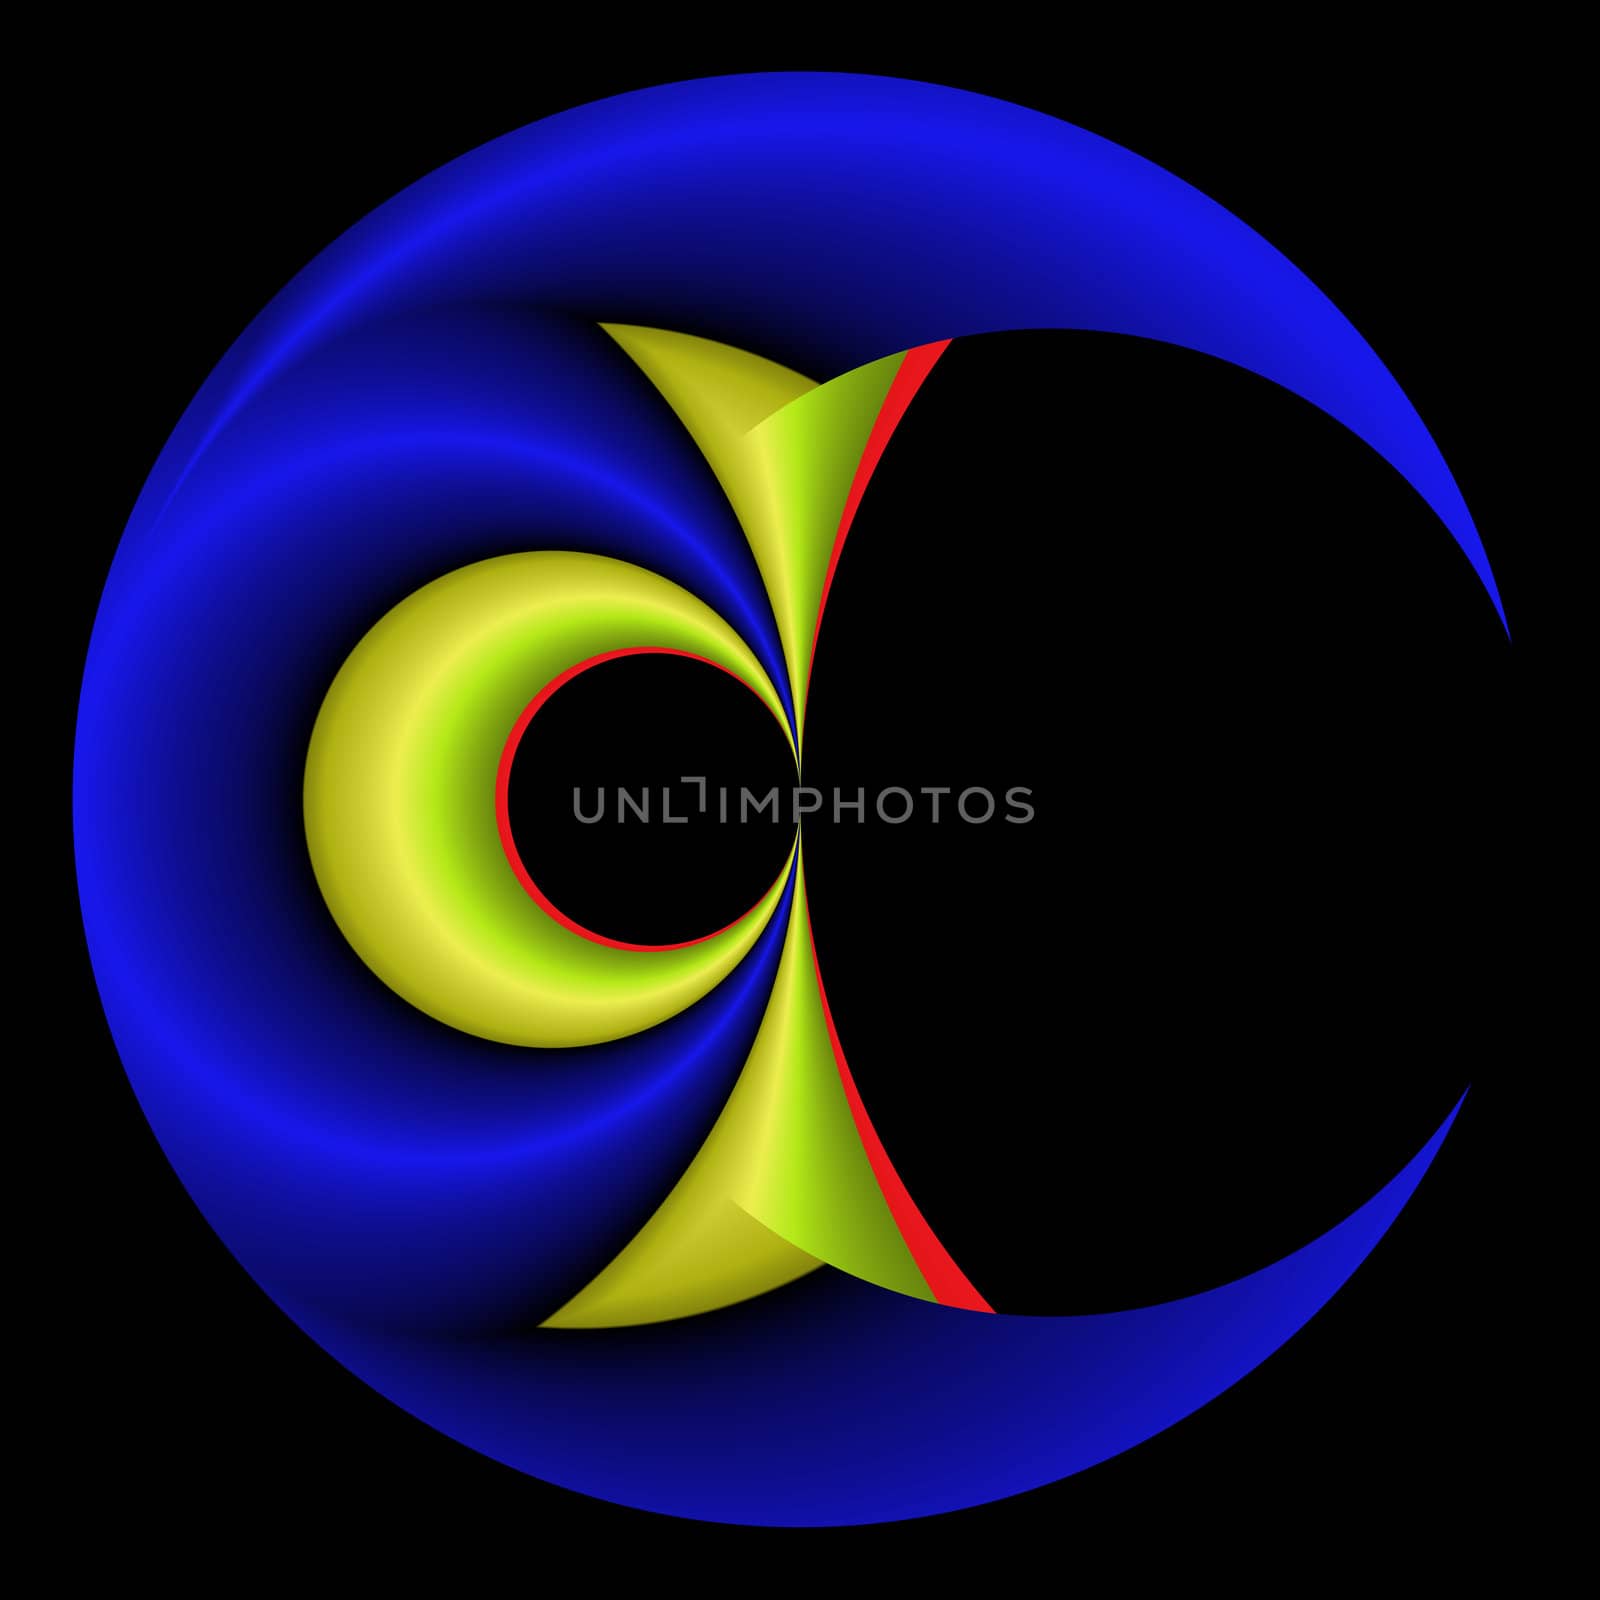 An abstract fractal with a blue circle that has a green and orange central motif.